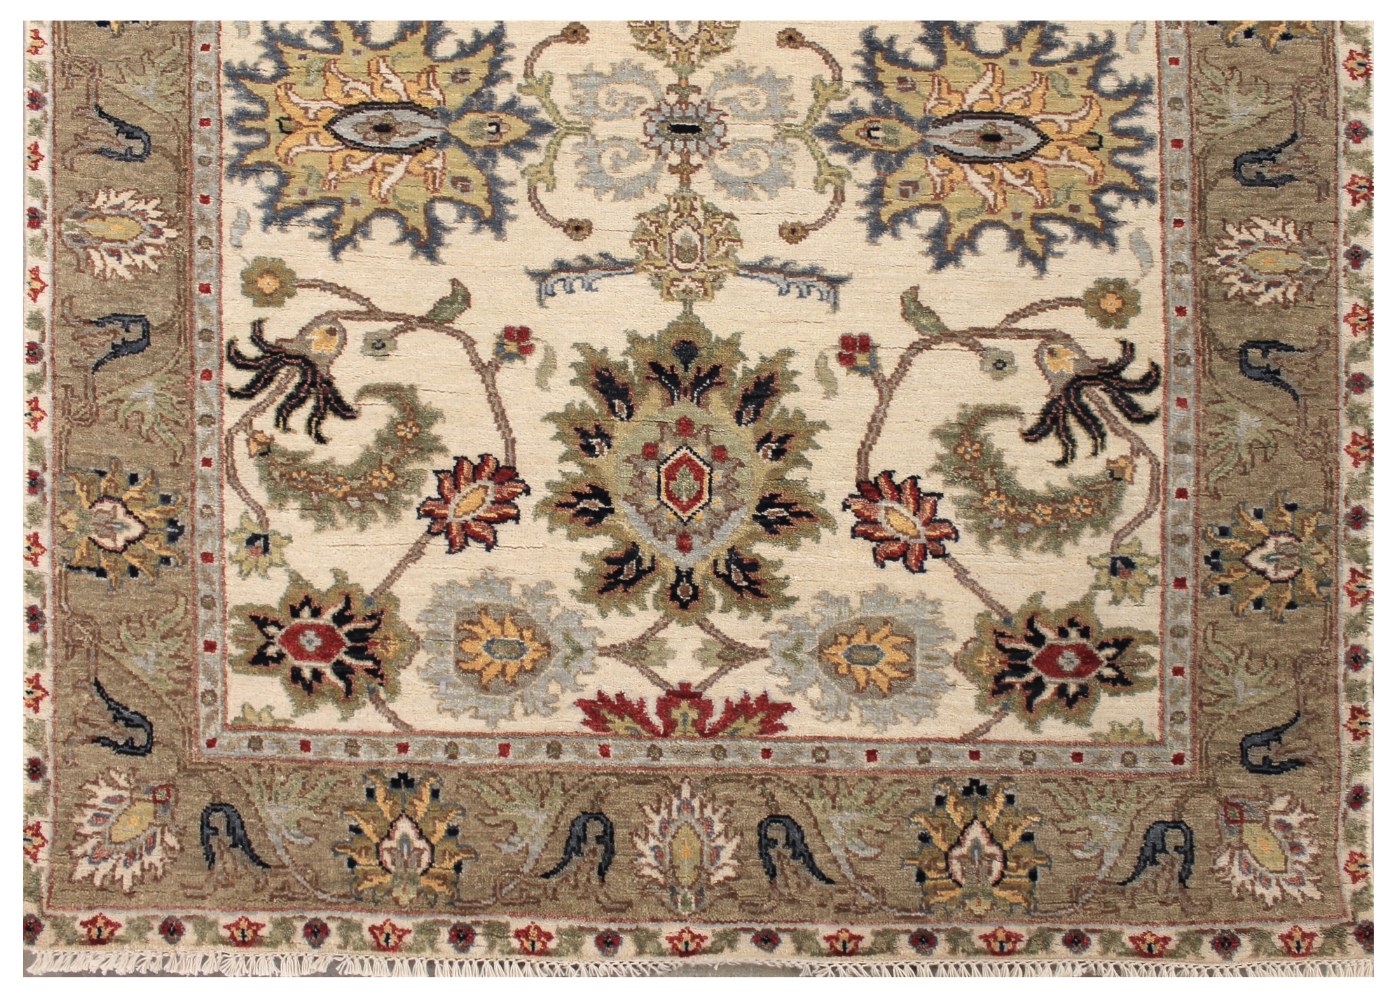 Wide Runner Traditional Hand Knotted Wool Area Rug - MR028580